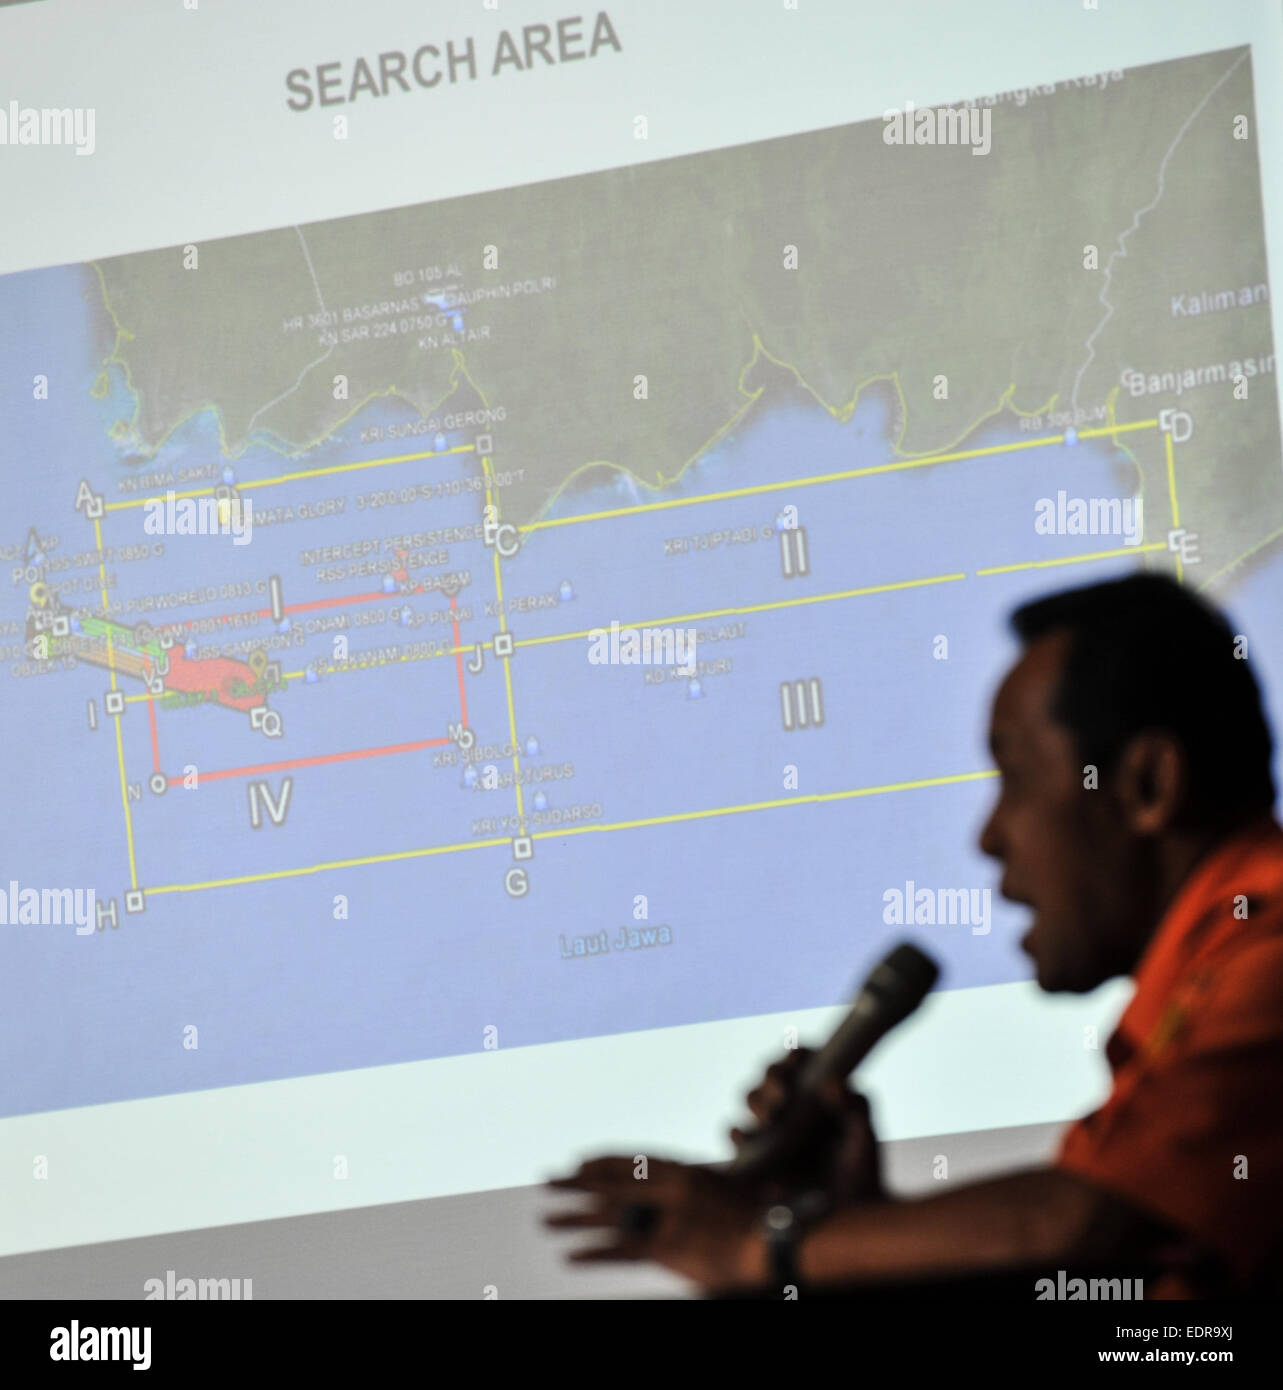 Jakarta, Indonesia. 9th Jan, 2015. Bambang Soelistyo, head of Indonesia's National Search and Rescue Agency, shows the possible area of the blackbox during the 13th searching and evacuation of the AirAsia Flight QZ8501, in Jakarta, Indonesia, Jan. 9, 2015. Credit:  Veri Sanovri/Xinhua/Alamy Live News Stock Photo